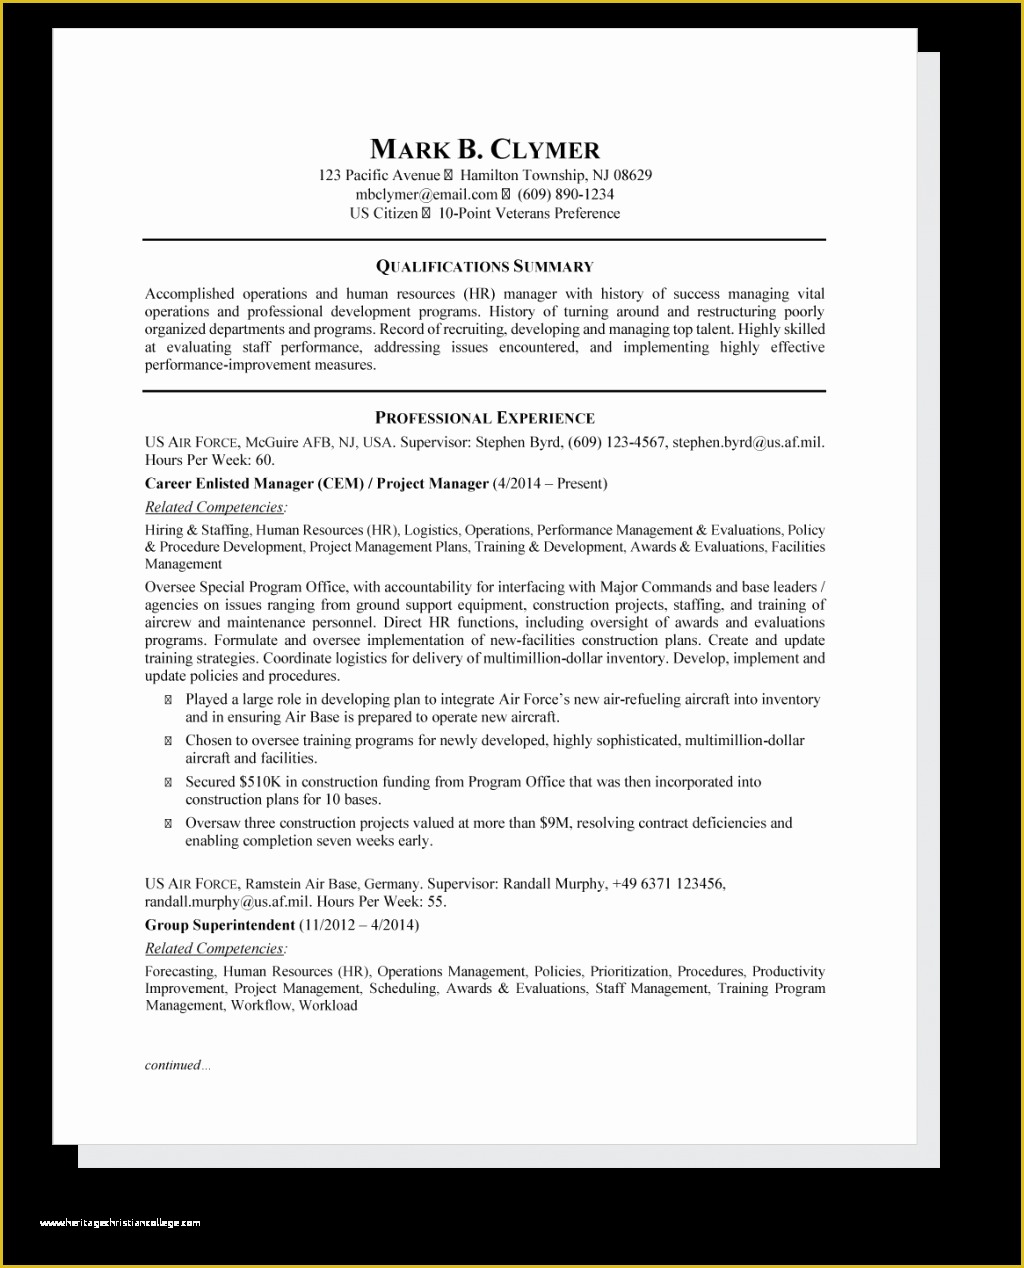 Free Federal Resume Template Of Resume and Template Federal Governmentume Stunning